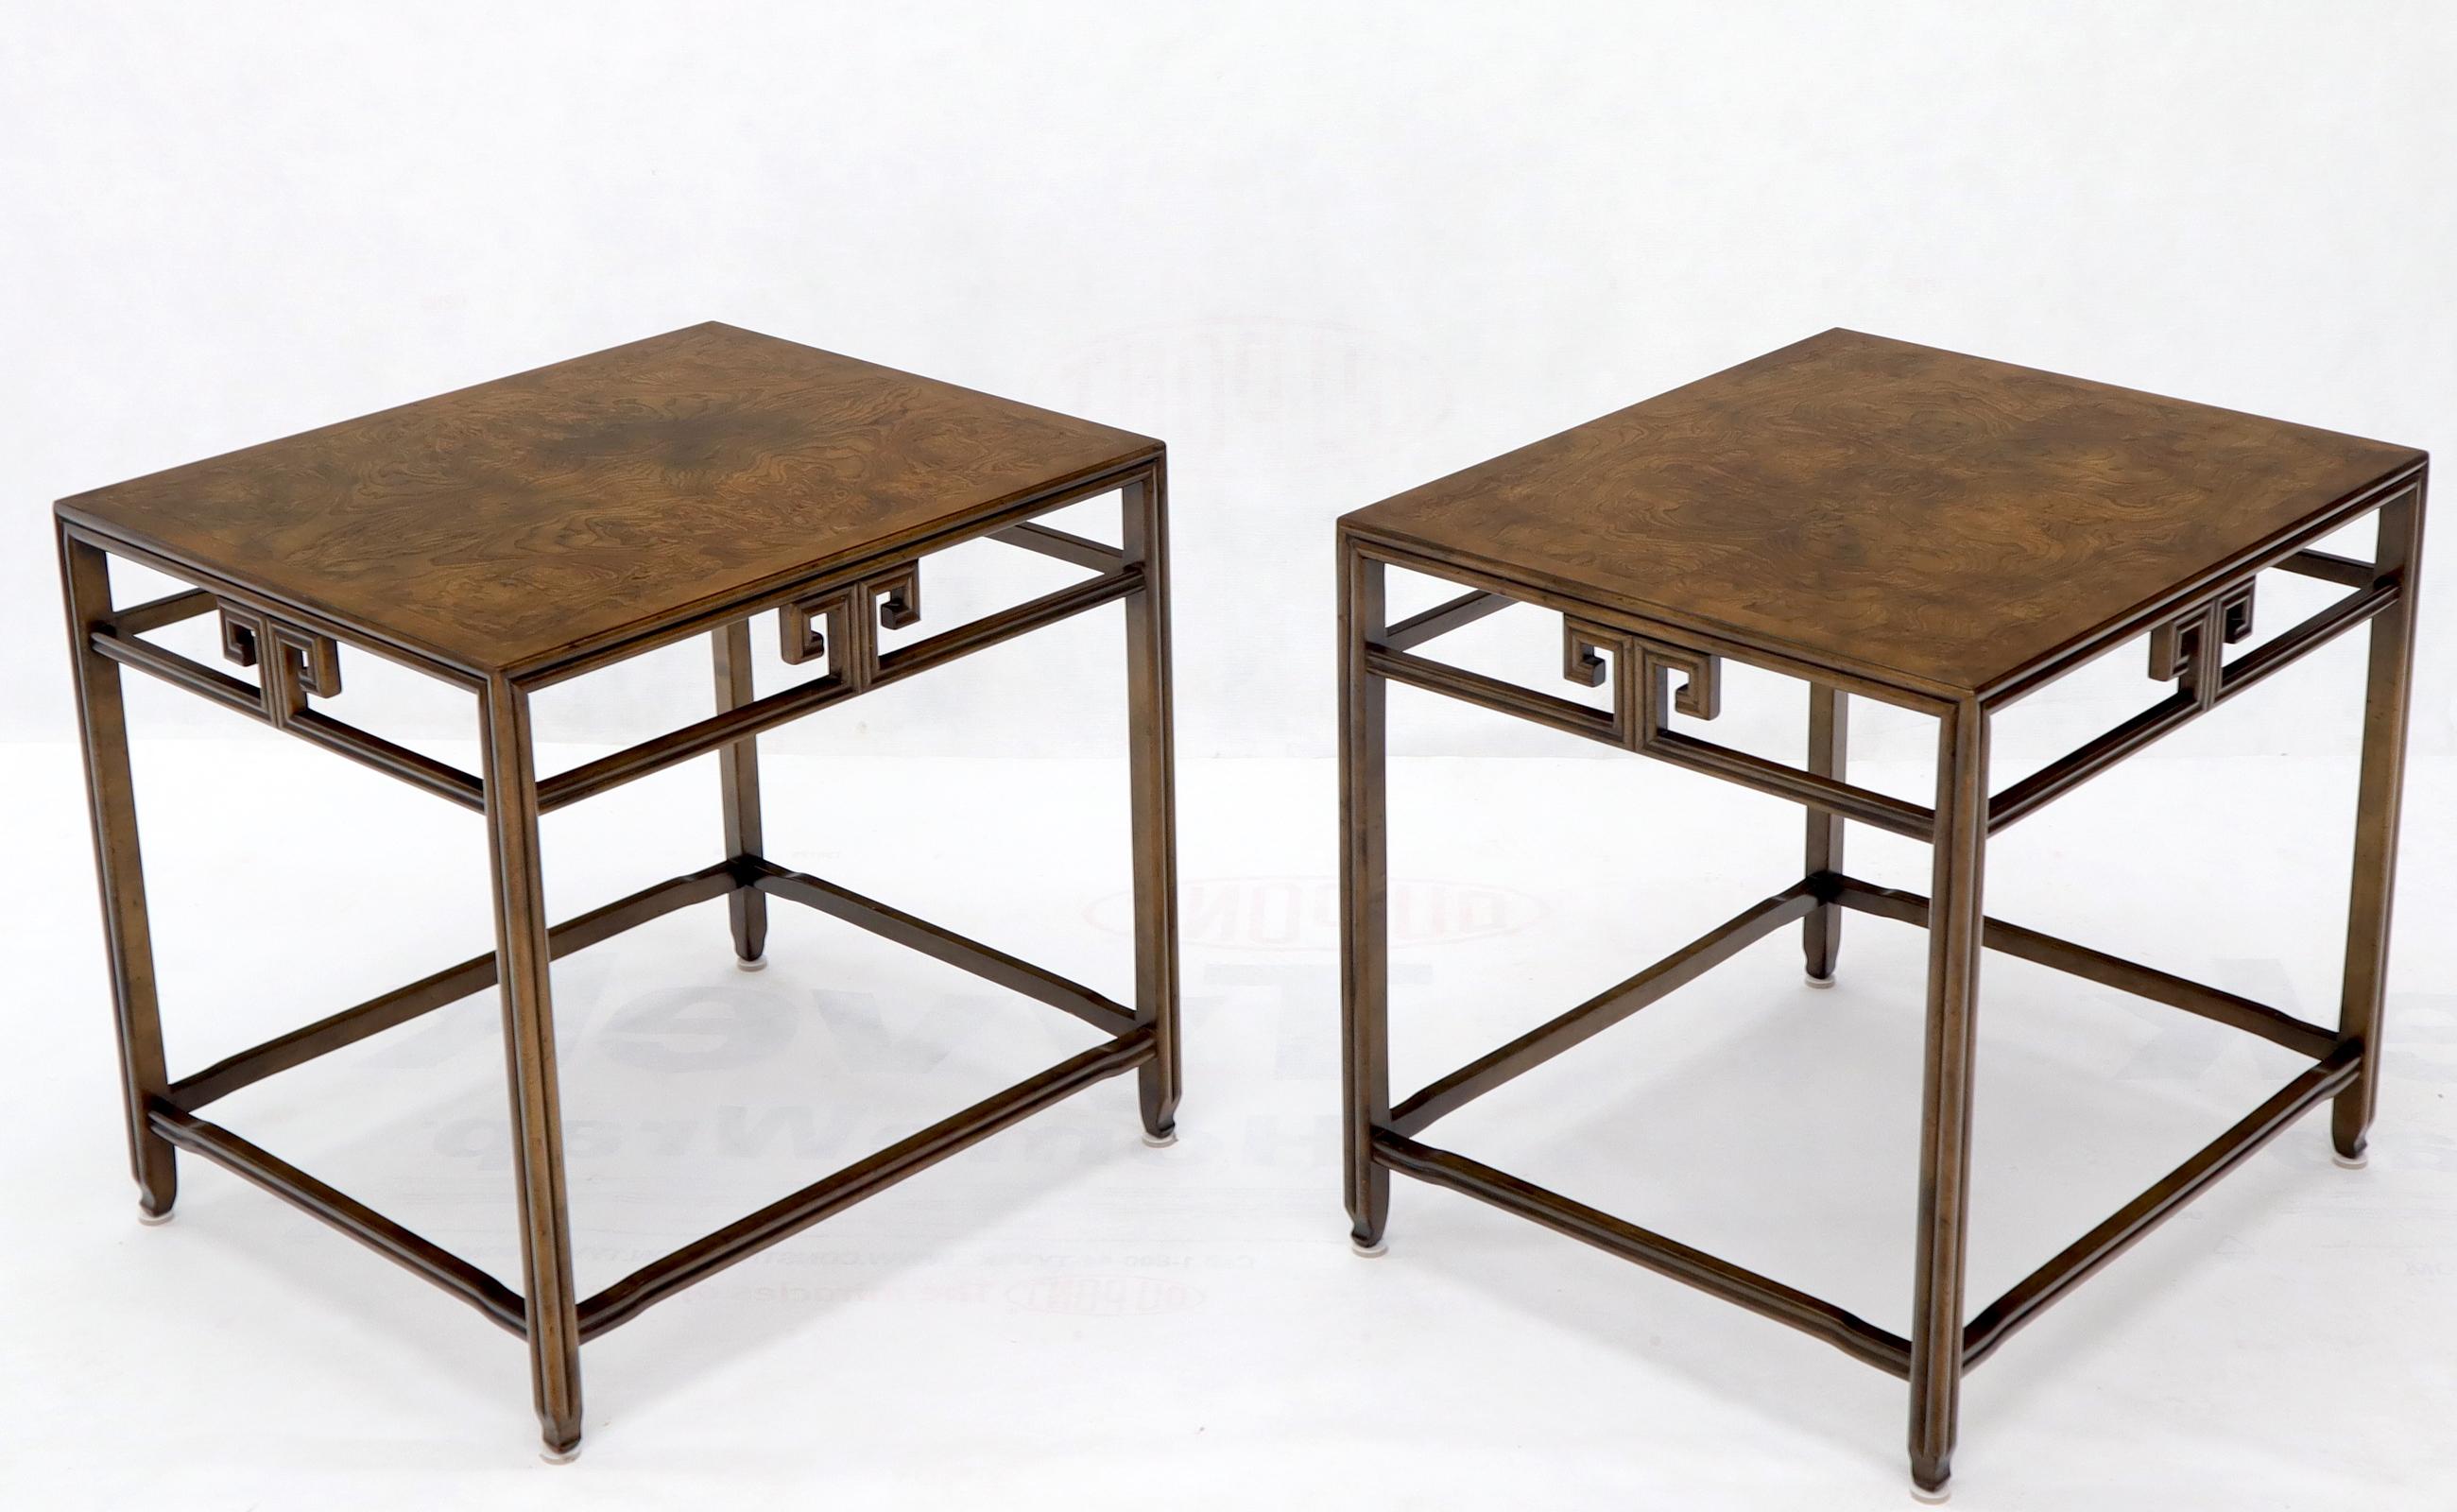 20th Century Pair of Burl Wood Asian Influence Side End Tables Stands by Baker